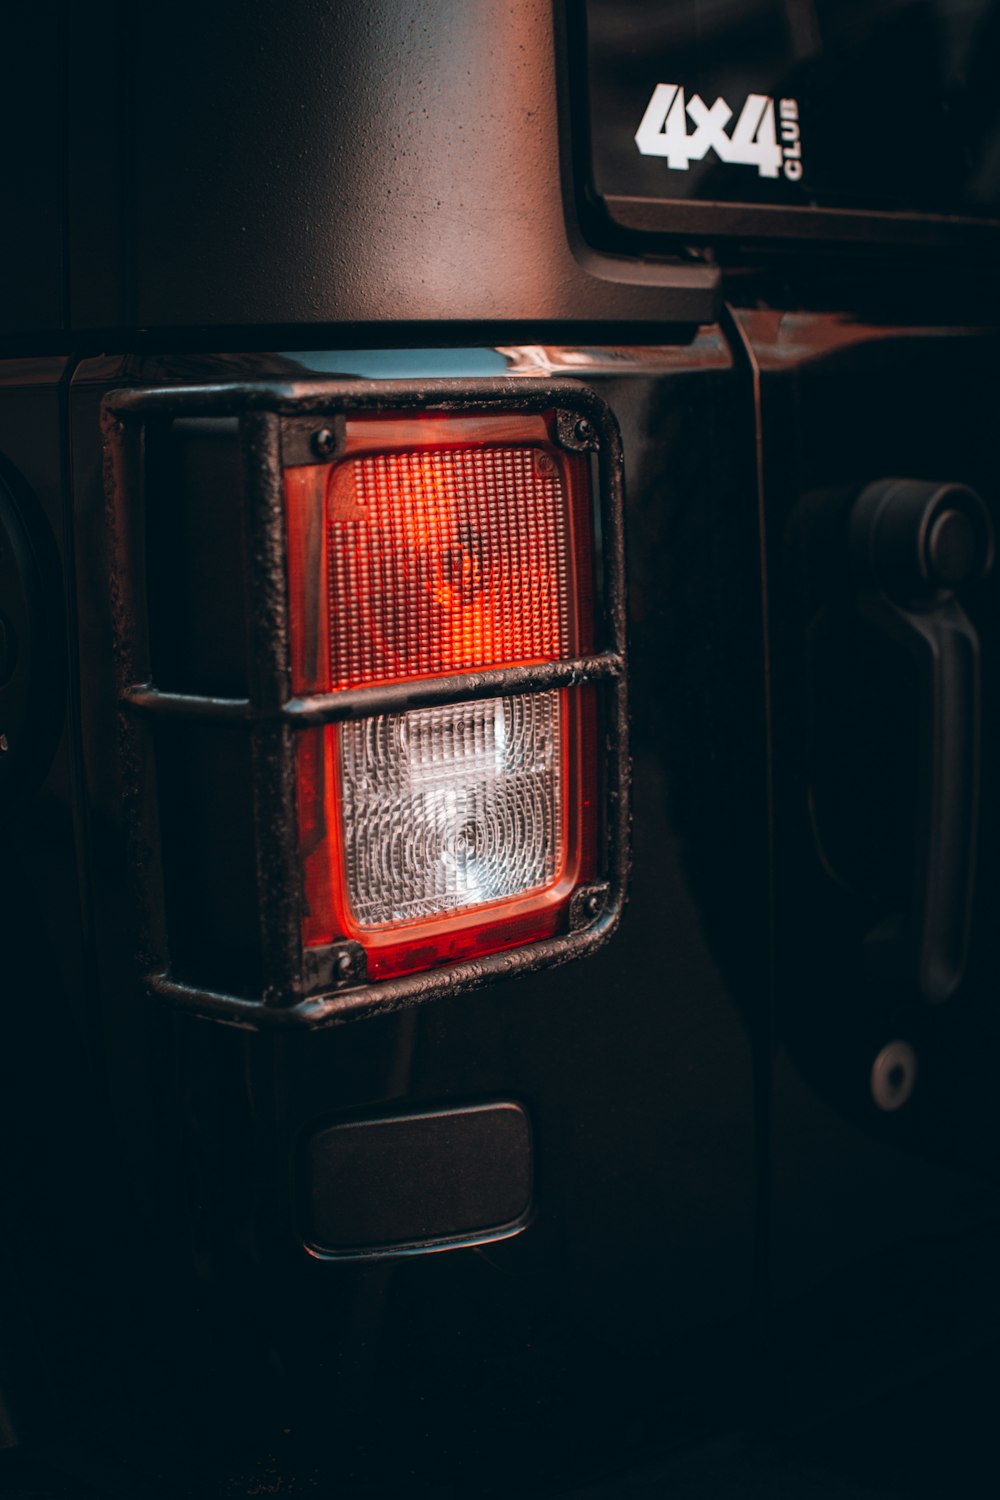 Black and red car light photo – Free Appliance Image on Unsplash